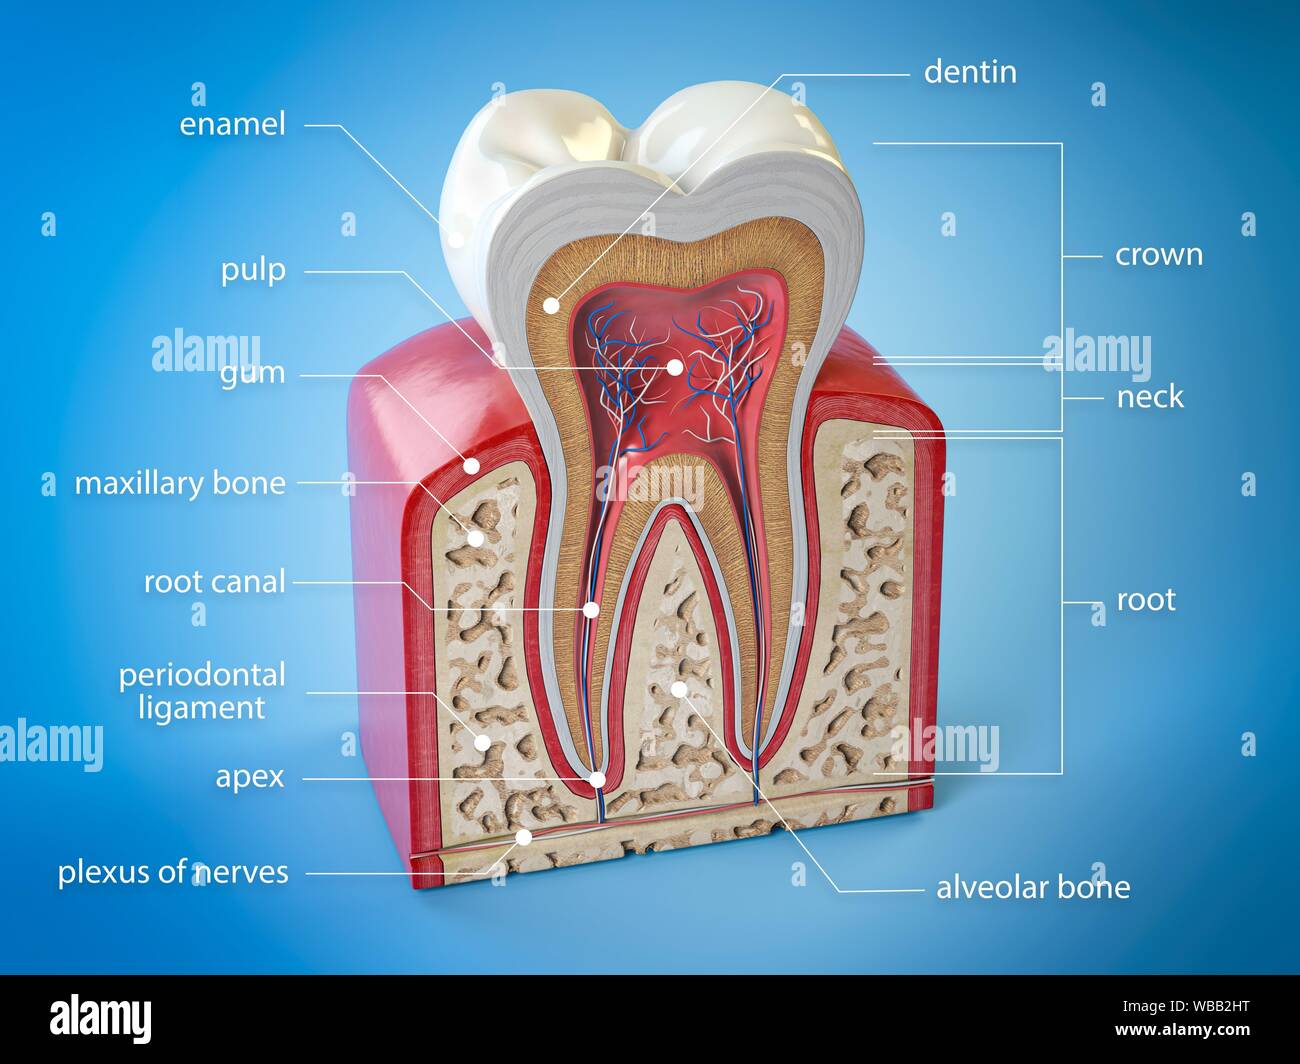 Anatomy Of A Molar Tooth Anatomical Charts & Posters